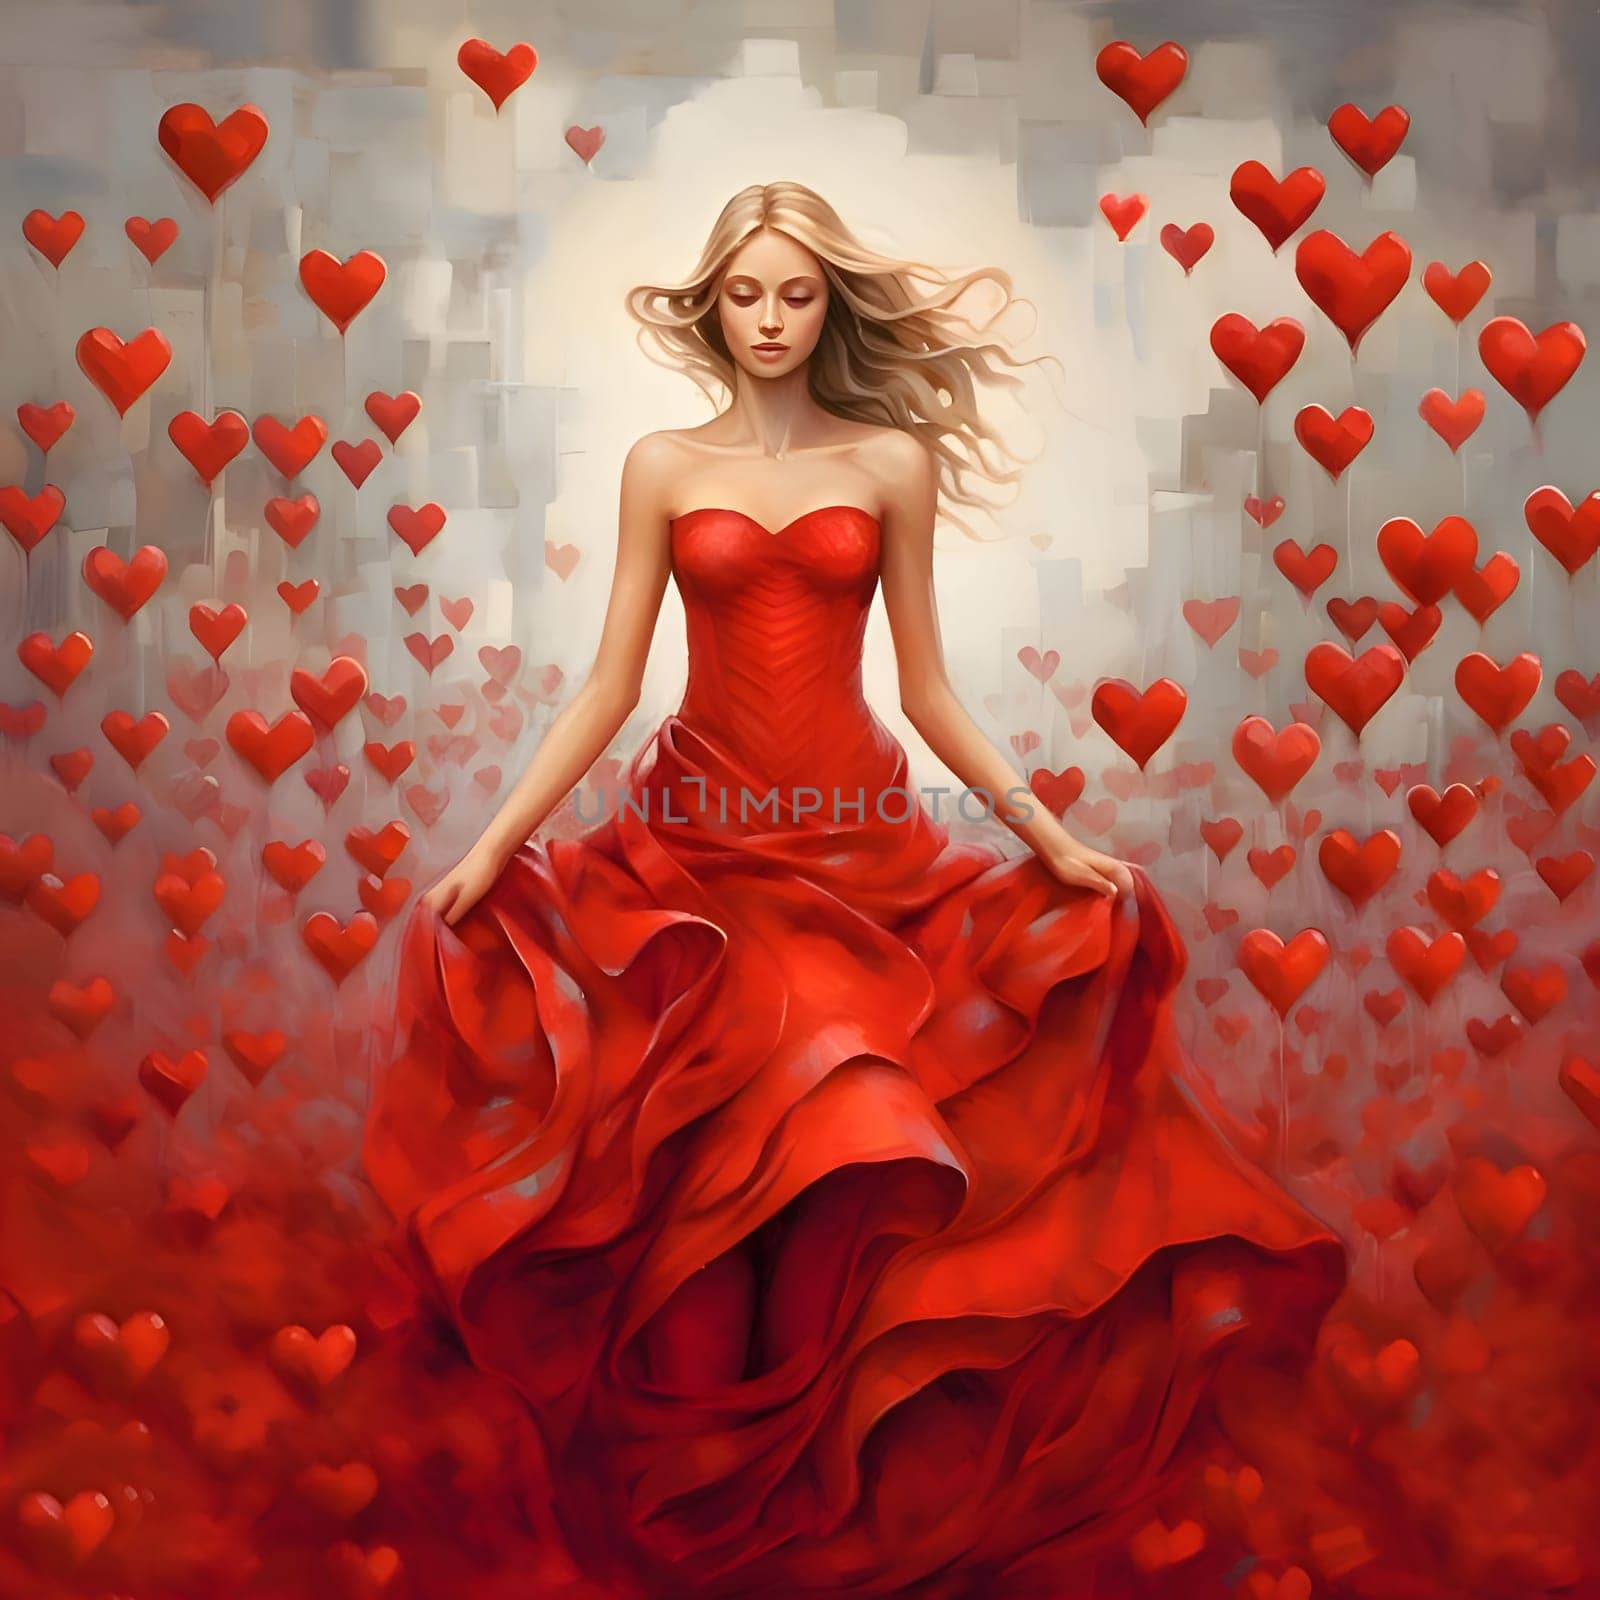 Blonde woman in red dress around rising red hearts. Heart as a symbol of affection and love. by ThemesS